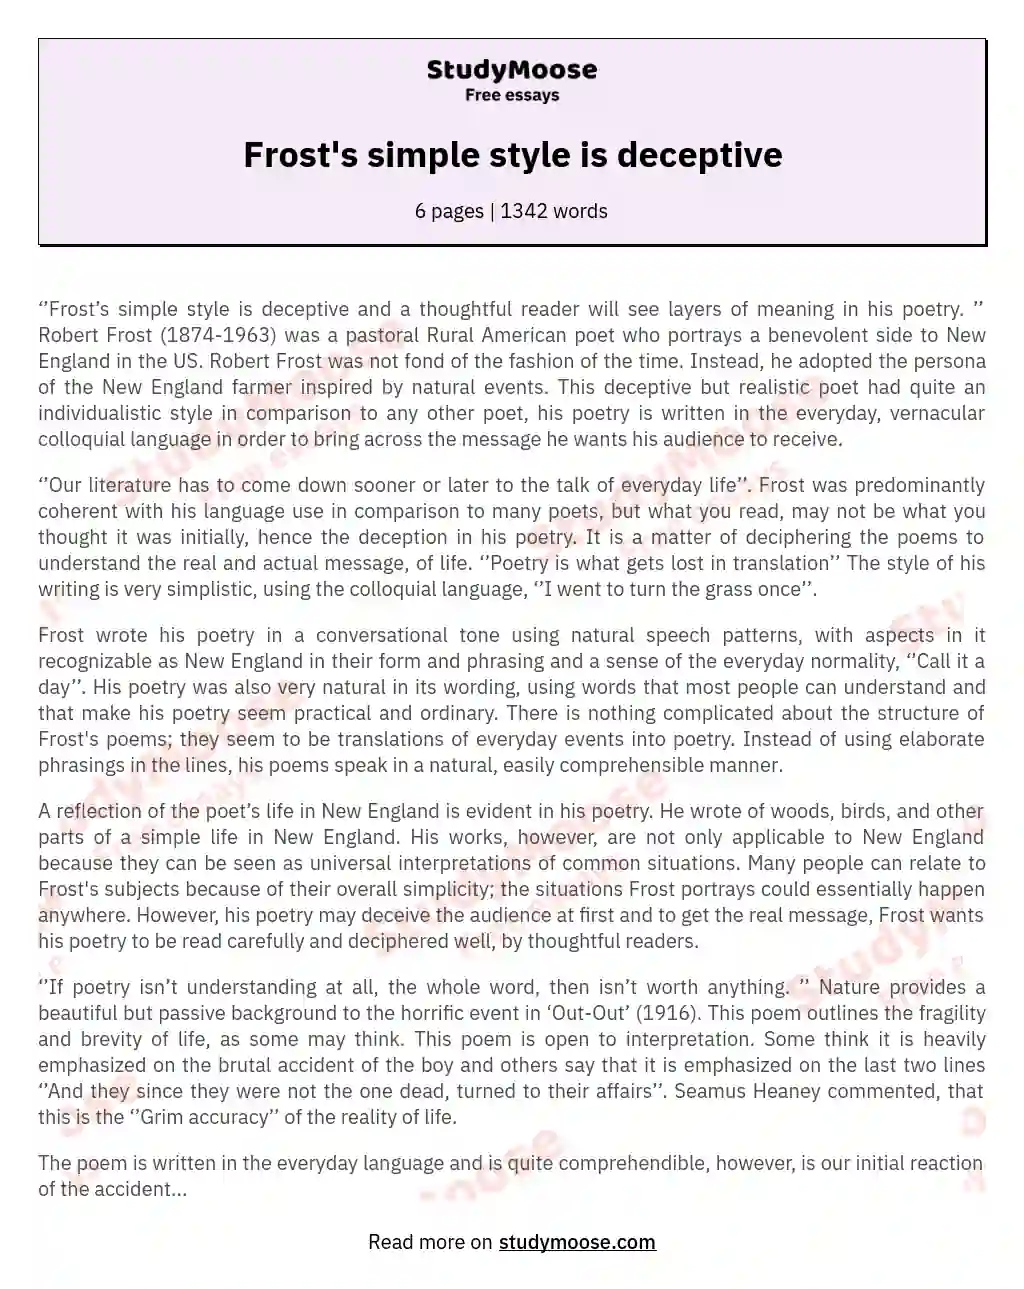 Frost's simple style is deceptive essay